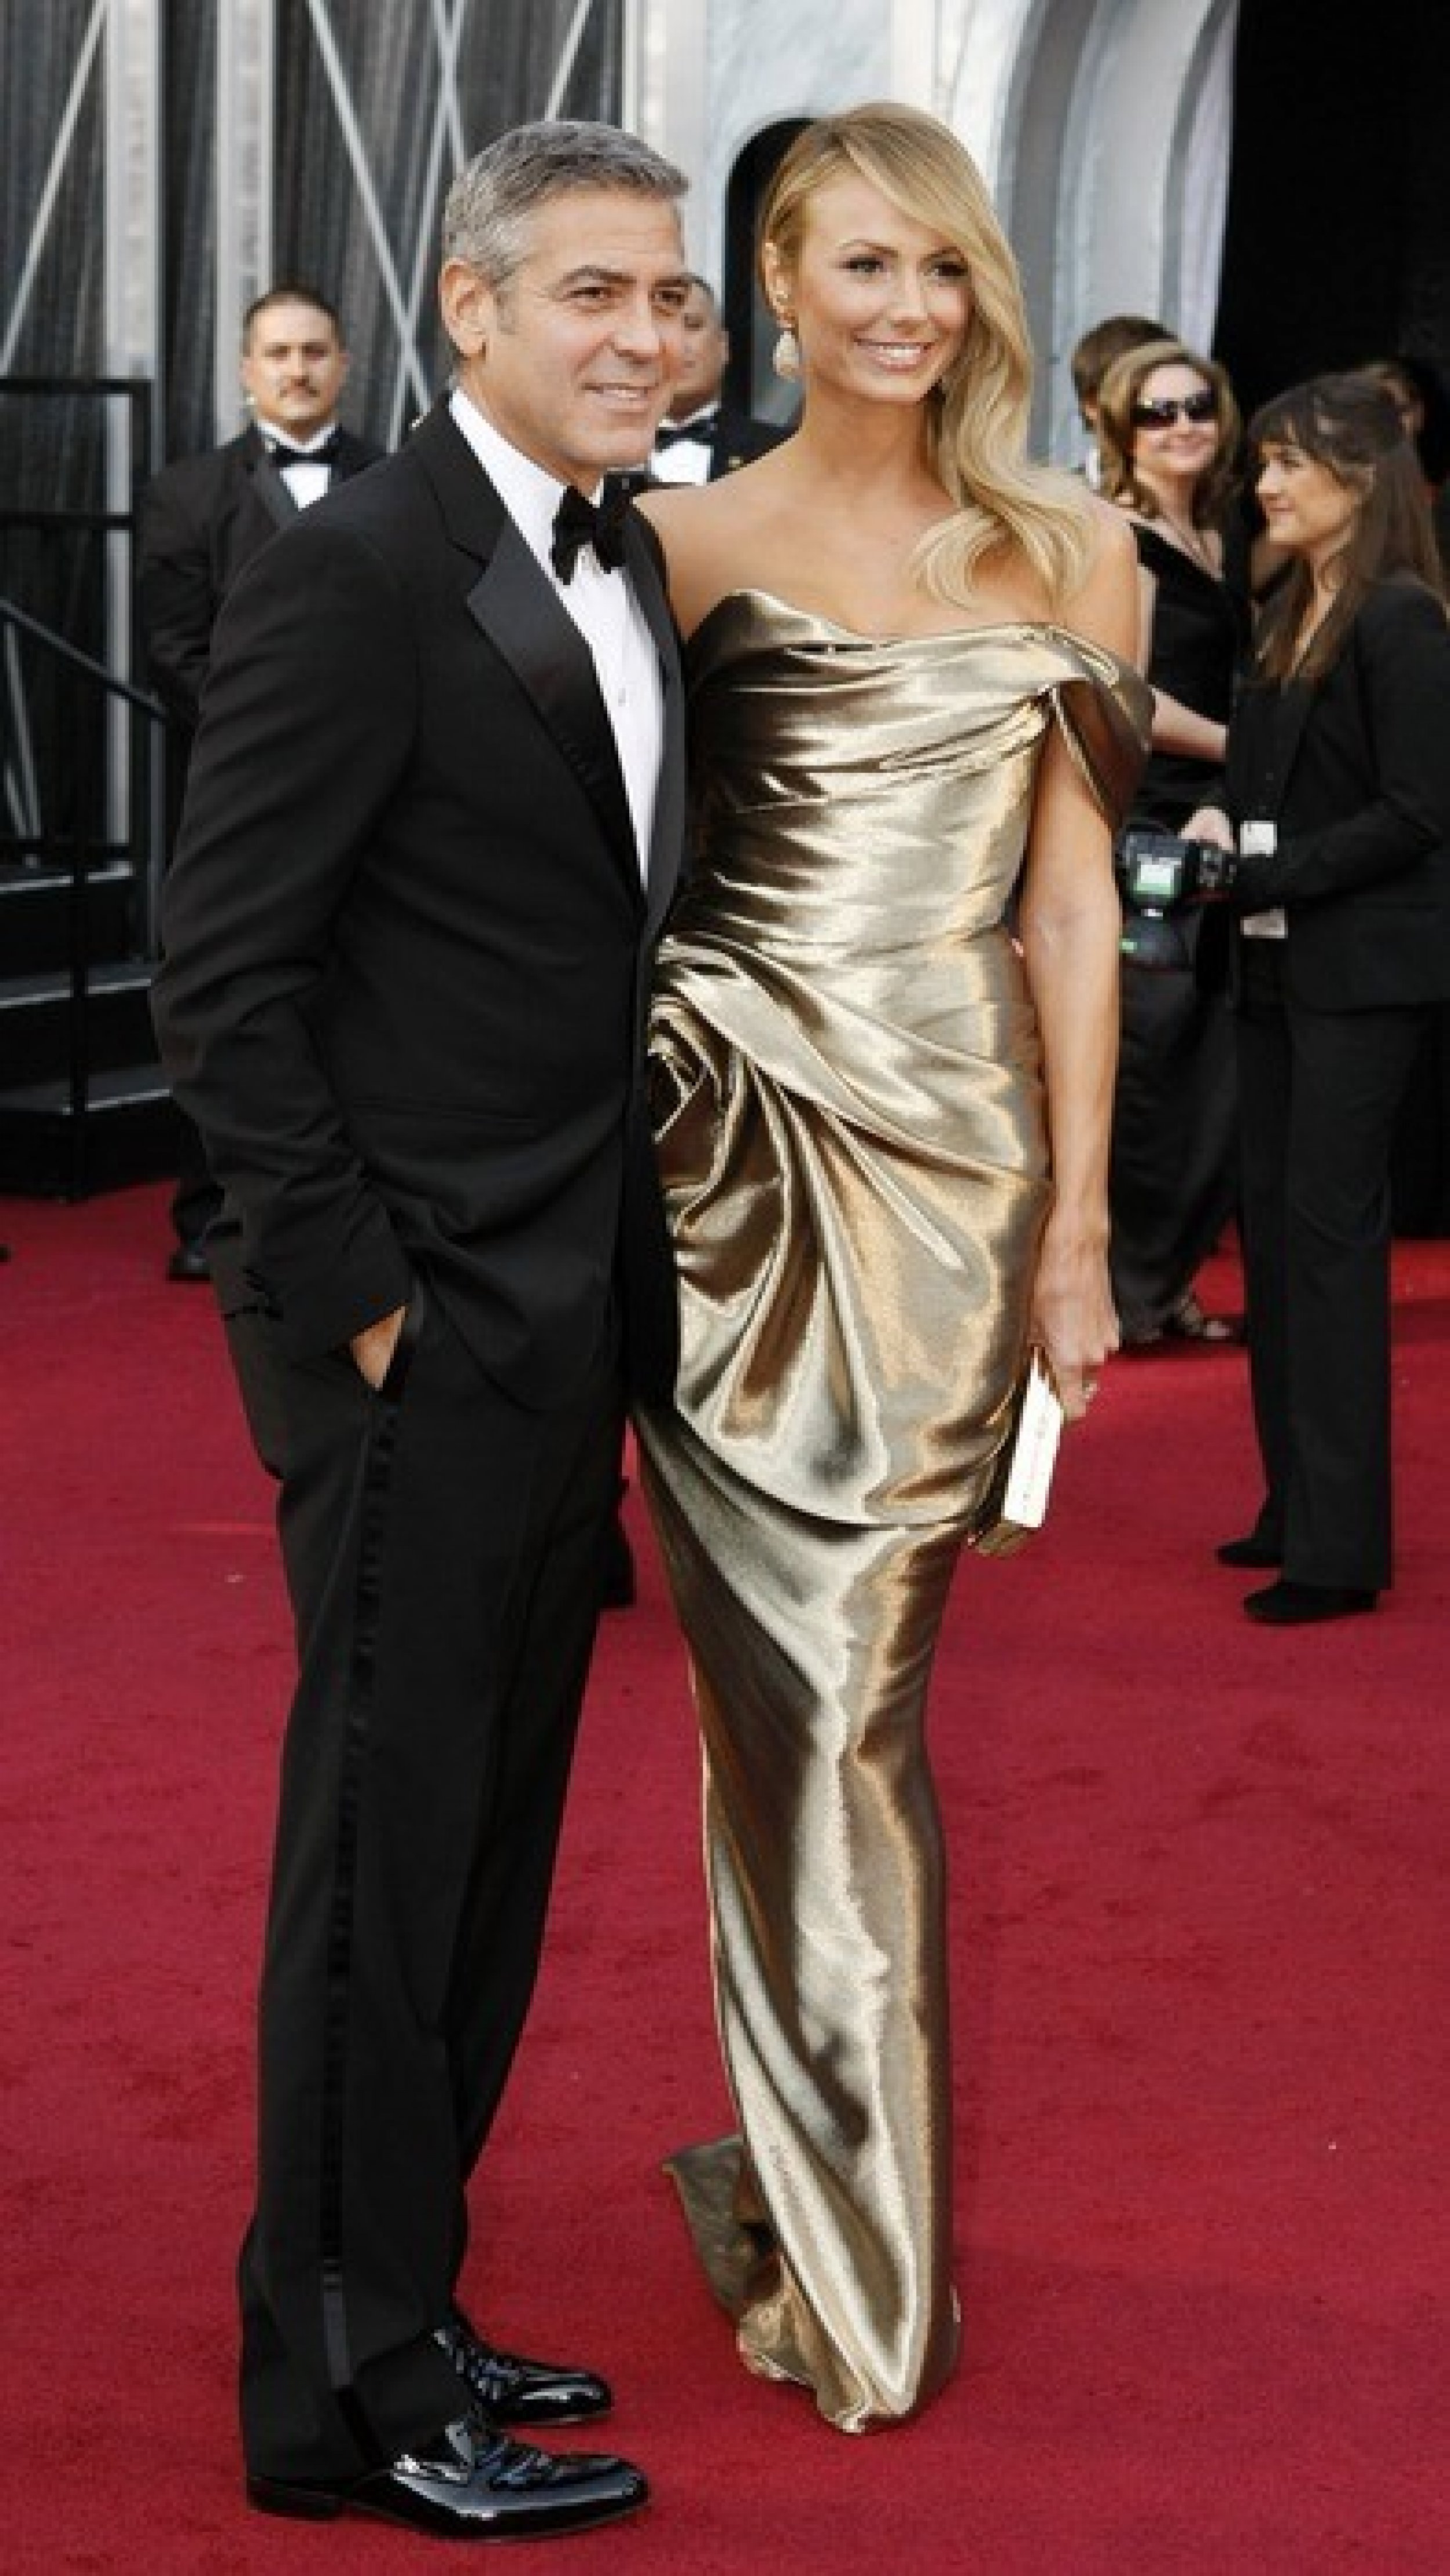 George Clooney and Stacy Keibler arrive at the 84th Academy Awards.